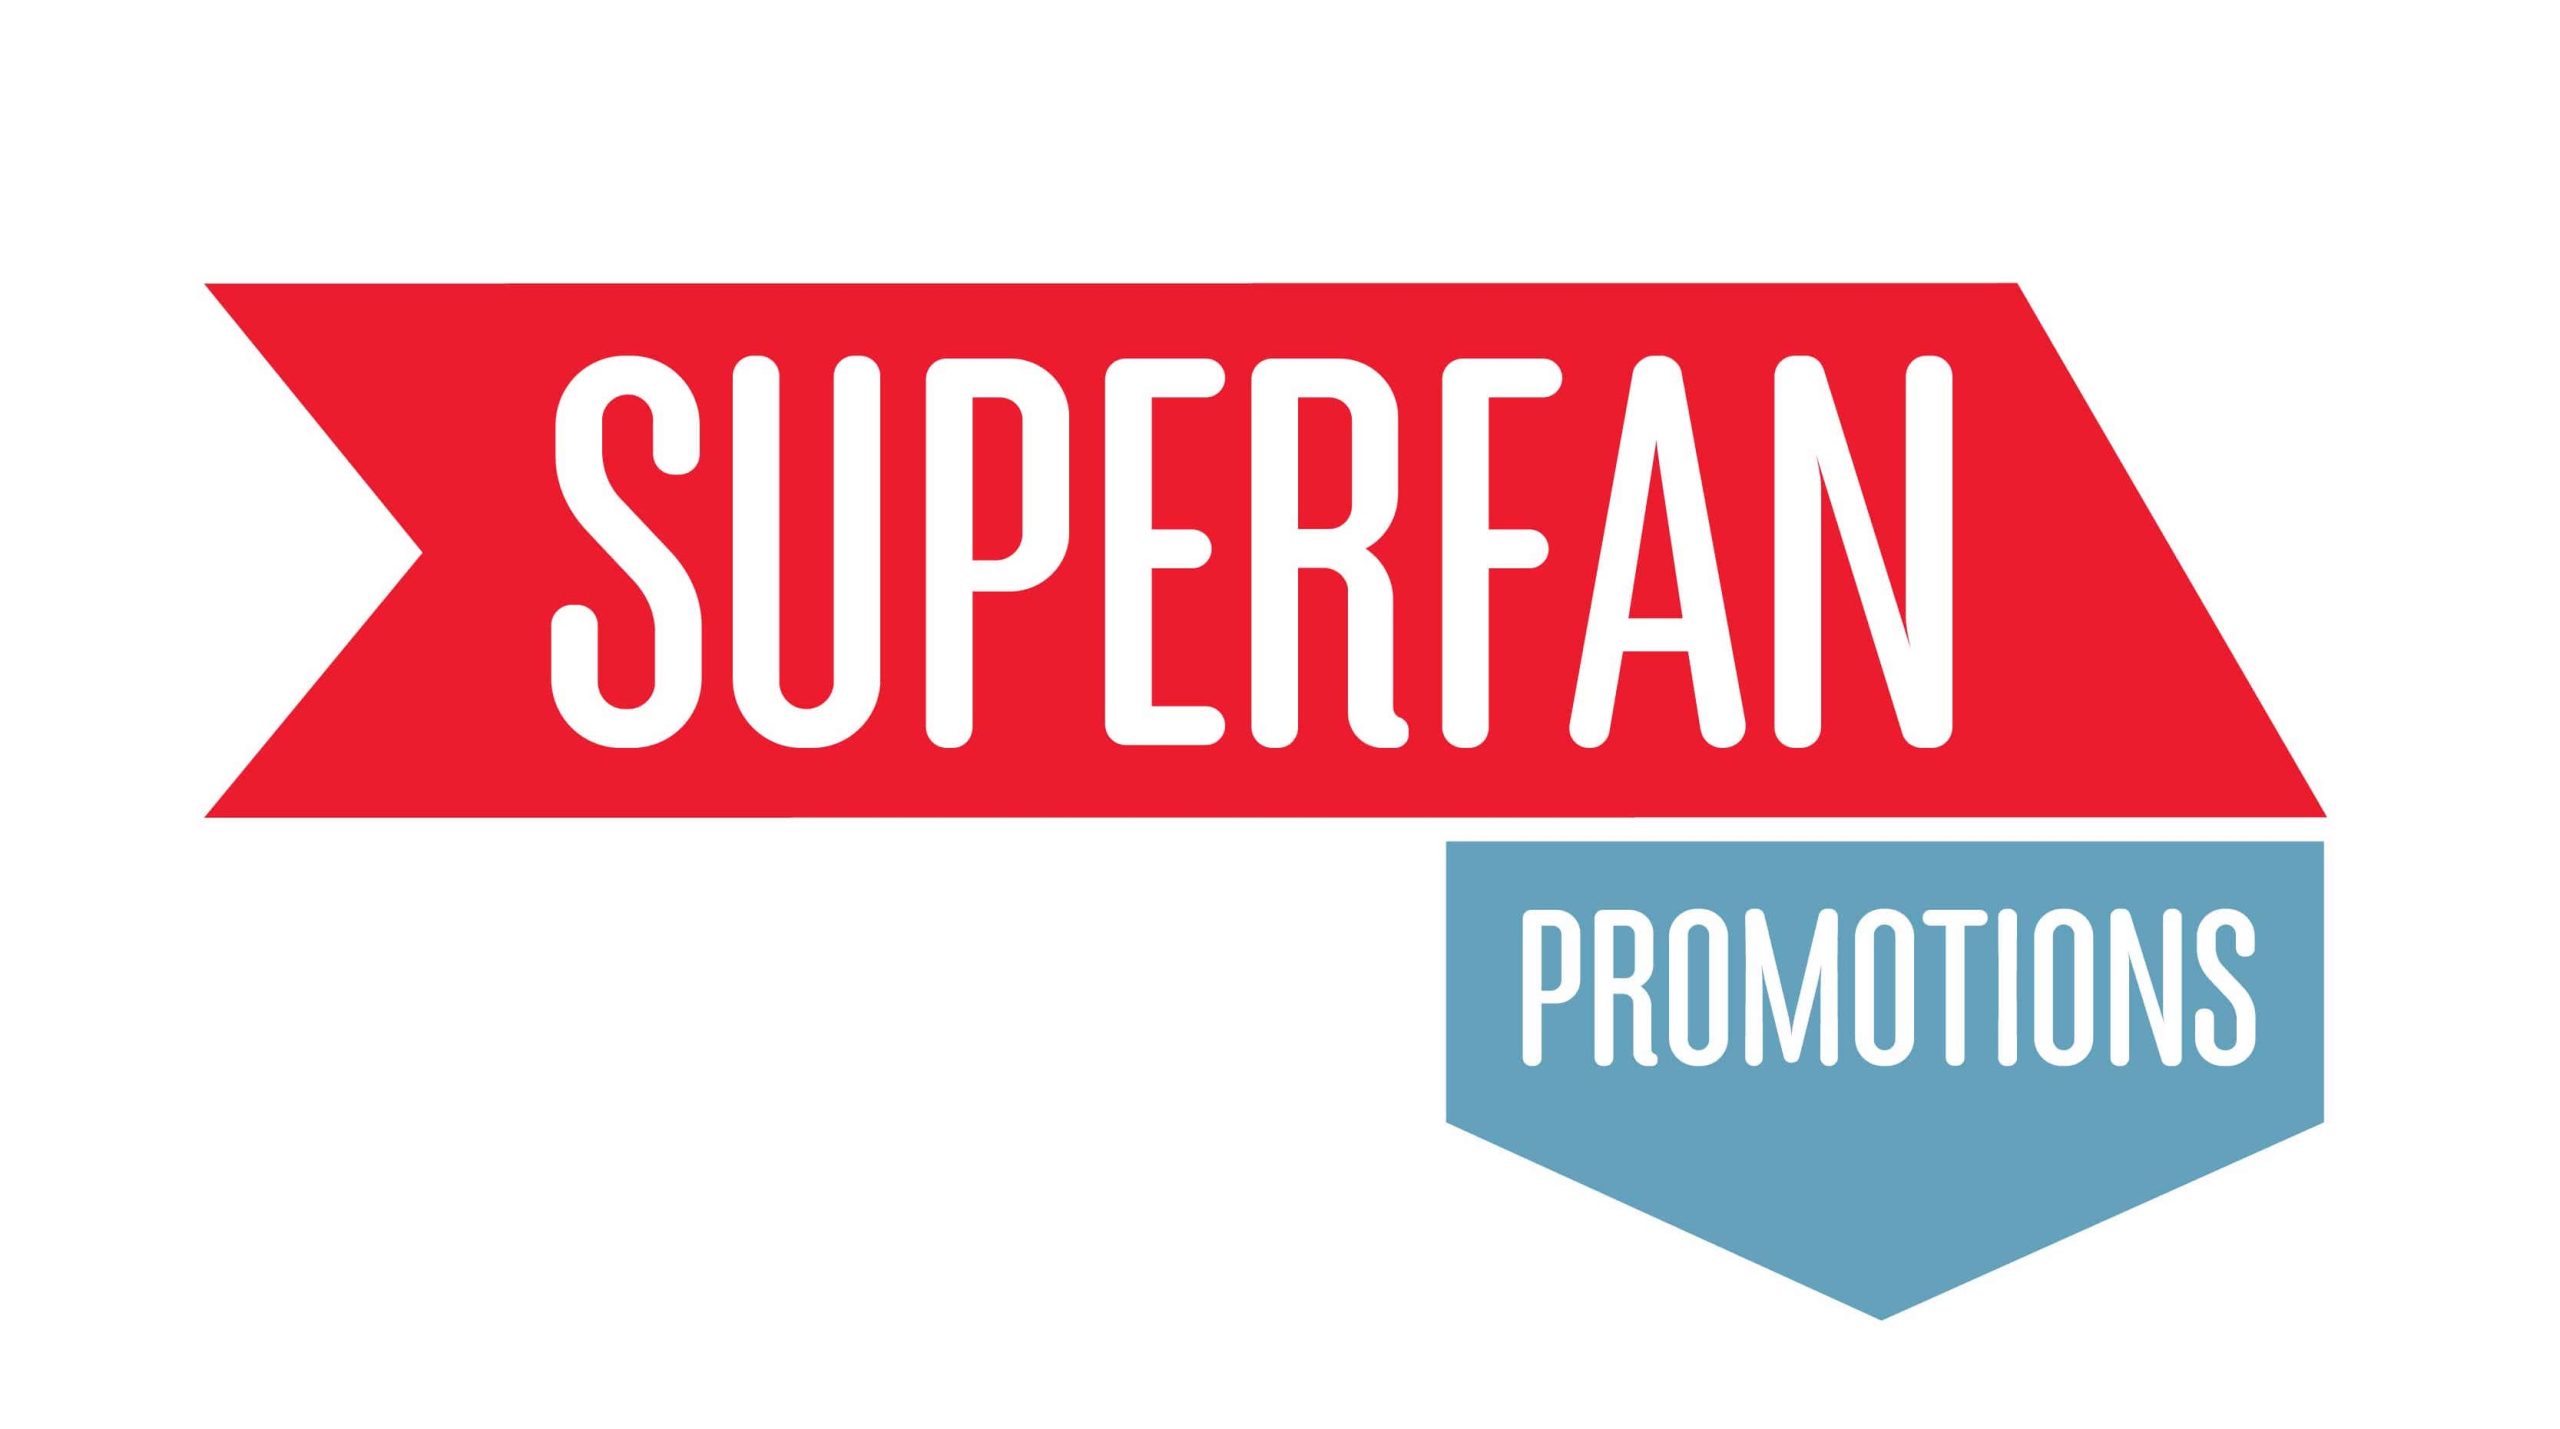 Superfan Promotions adds new staff and promotes from within